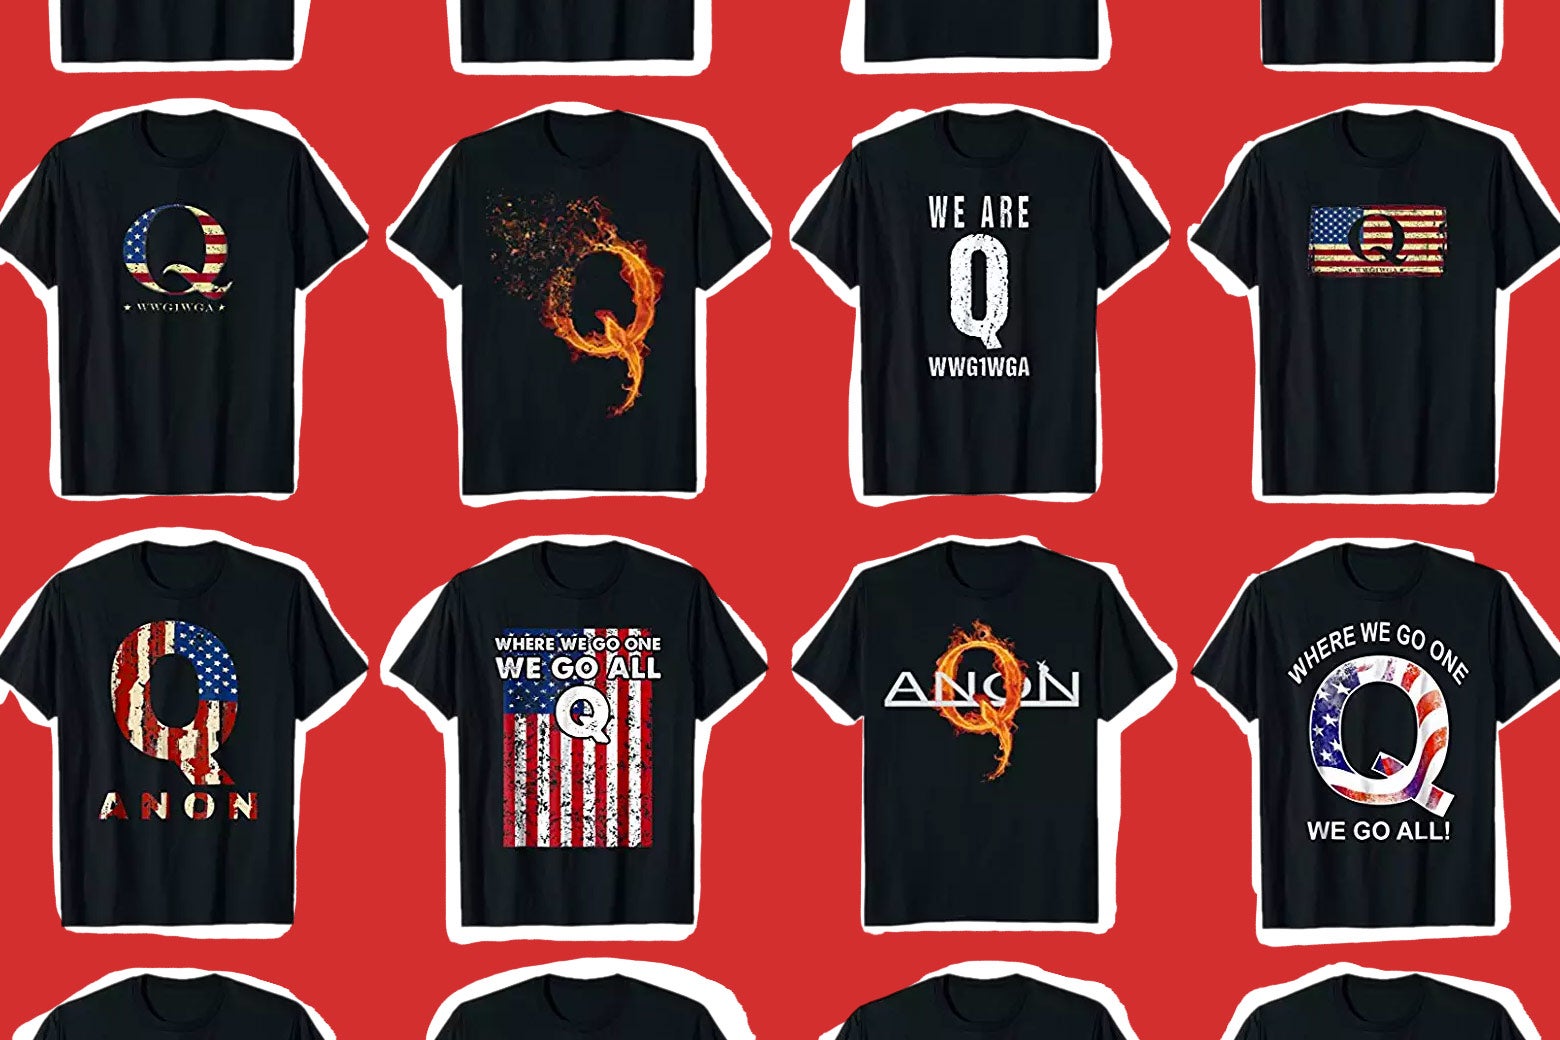 Photo illustration of various QAnon-related T-shirts currently for sale.